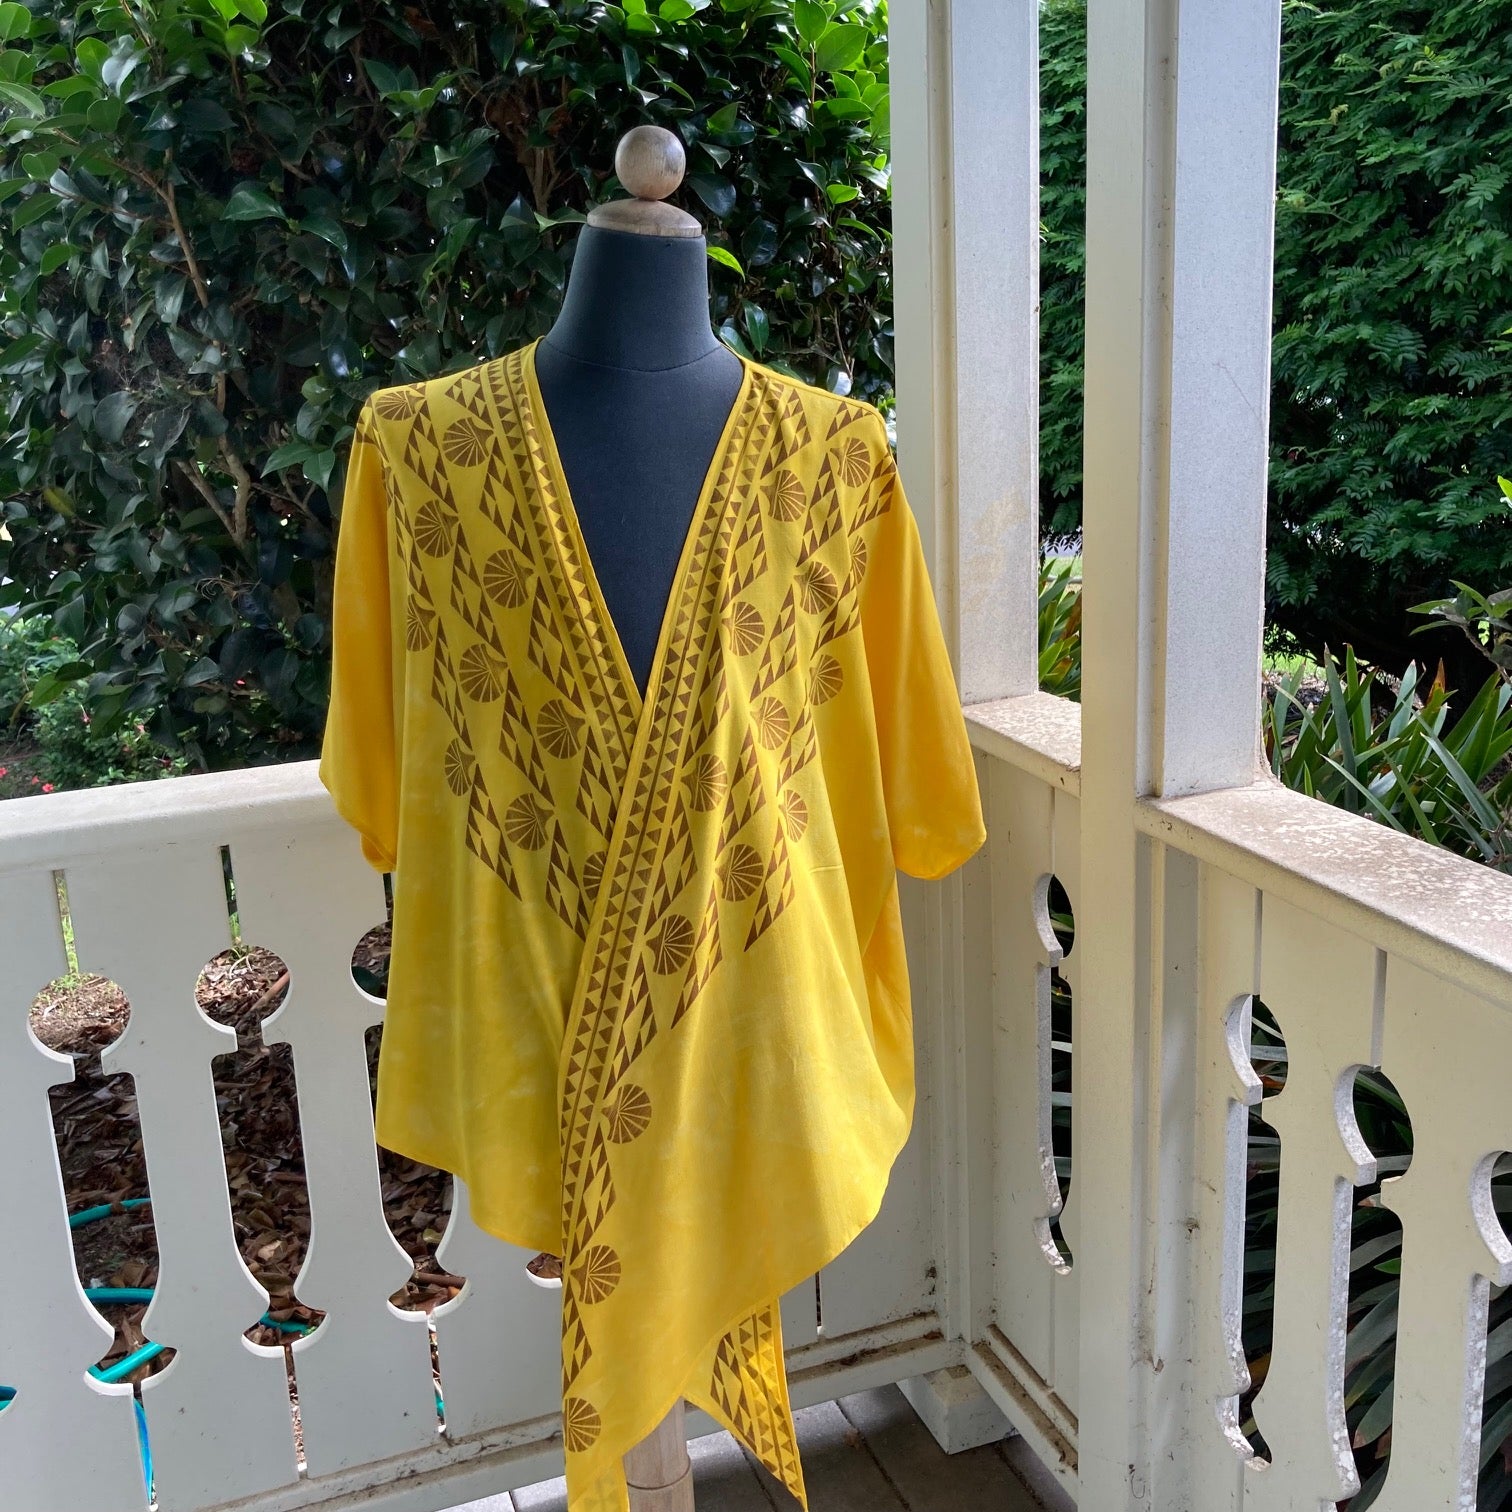 Ohe Kapala TIE Blouse in Yellow with Mauna and Lehua